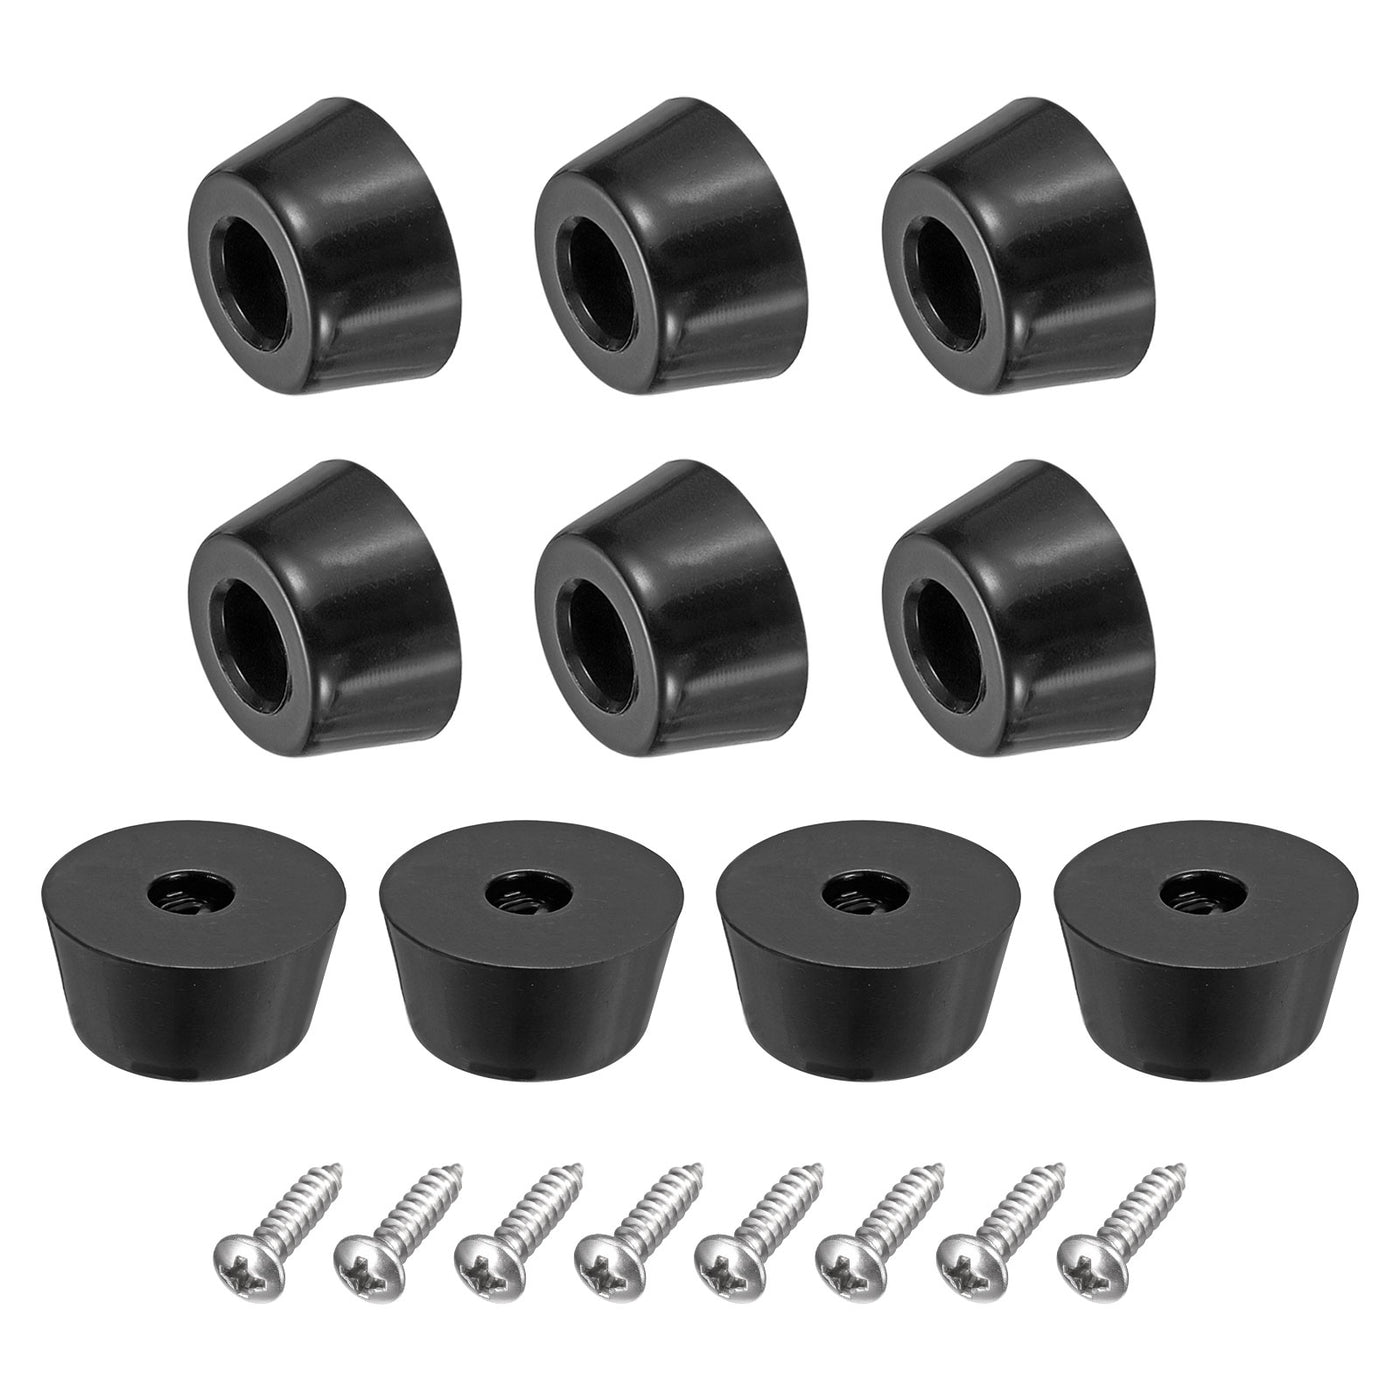 uxcell Uxcell 10Pcs Rubber Bumper Feet, 0.41" H x 0.79" W Round Pads with Stainless Steel Washer and Screws for Furniture, Appliances, Electronics